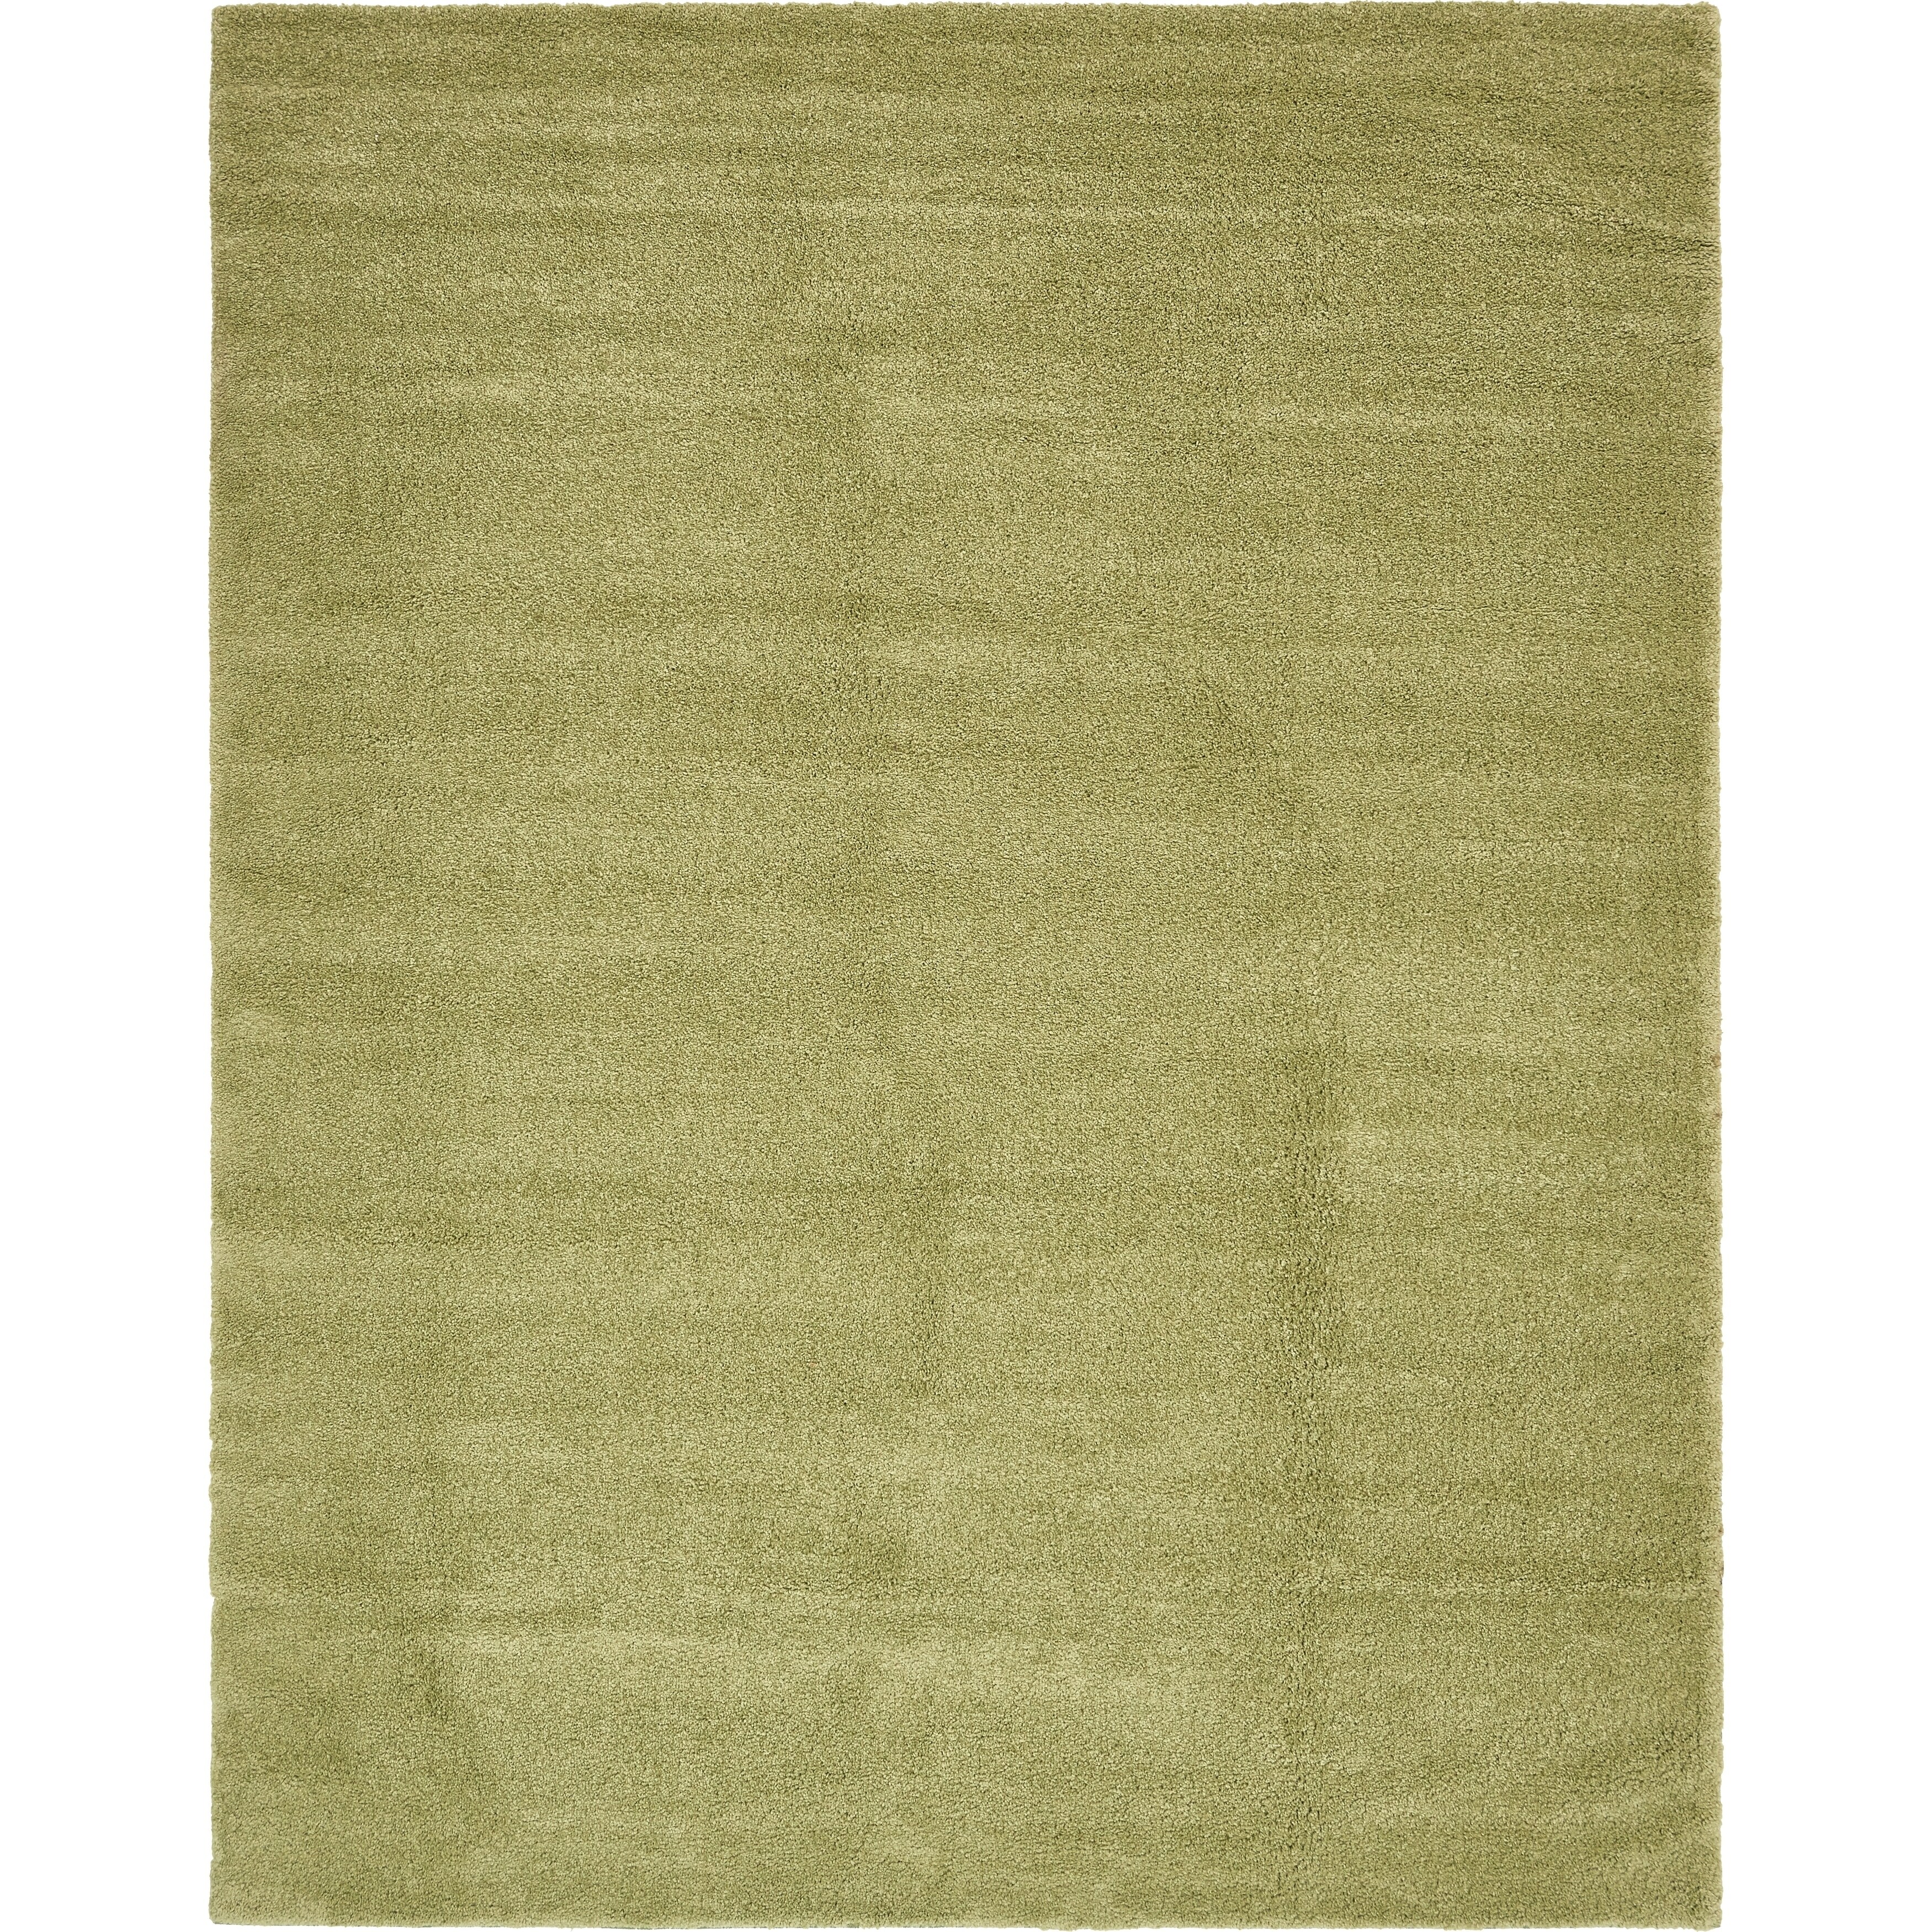 Buy Green Area Rugs Online At Overstockcom Our Best Rugs Deals